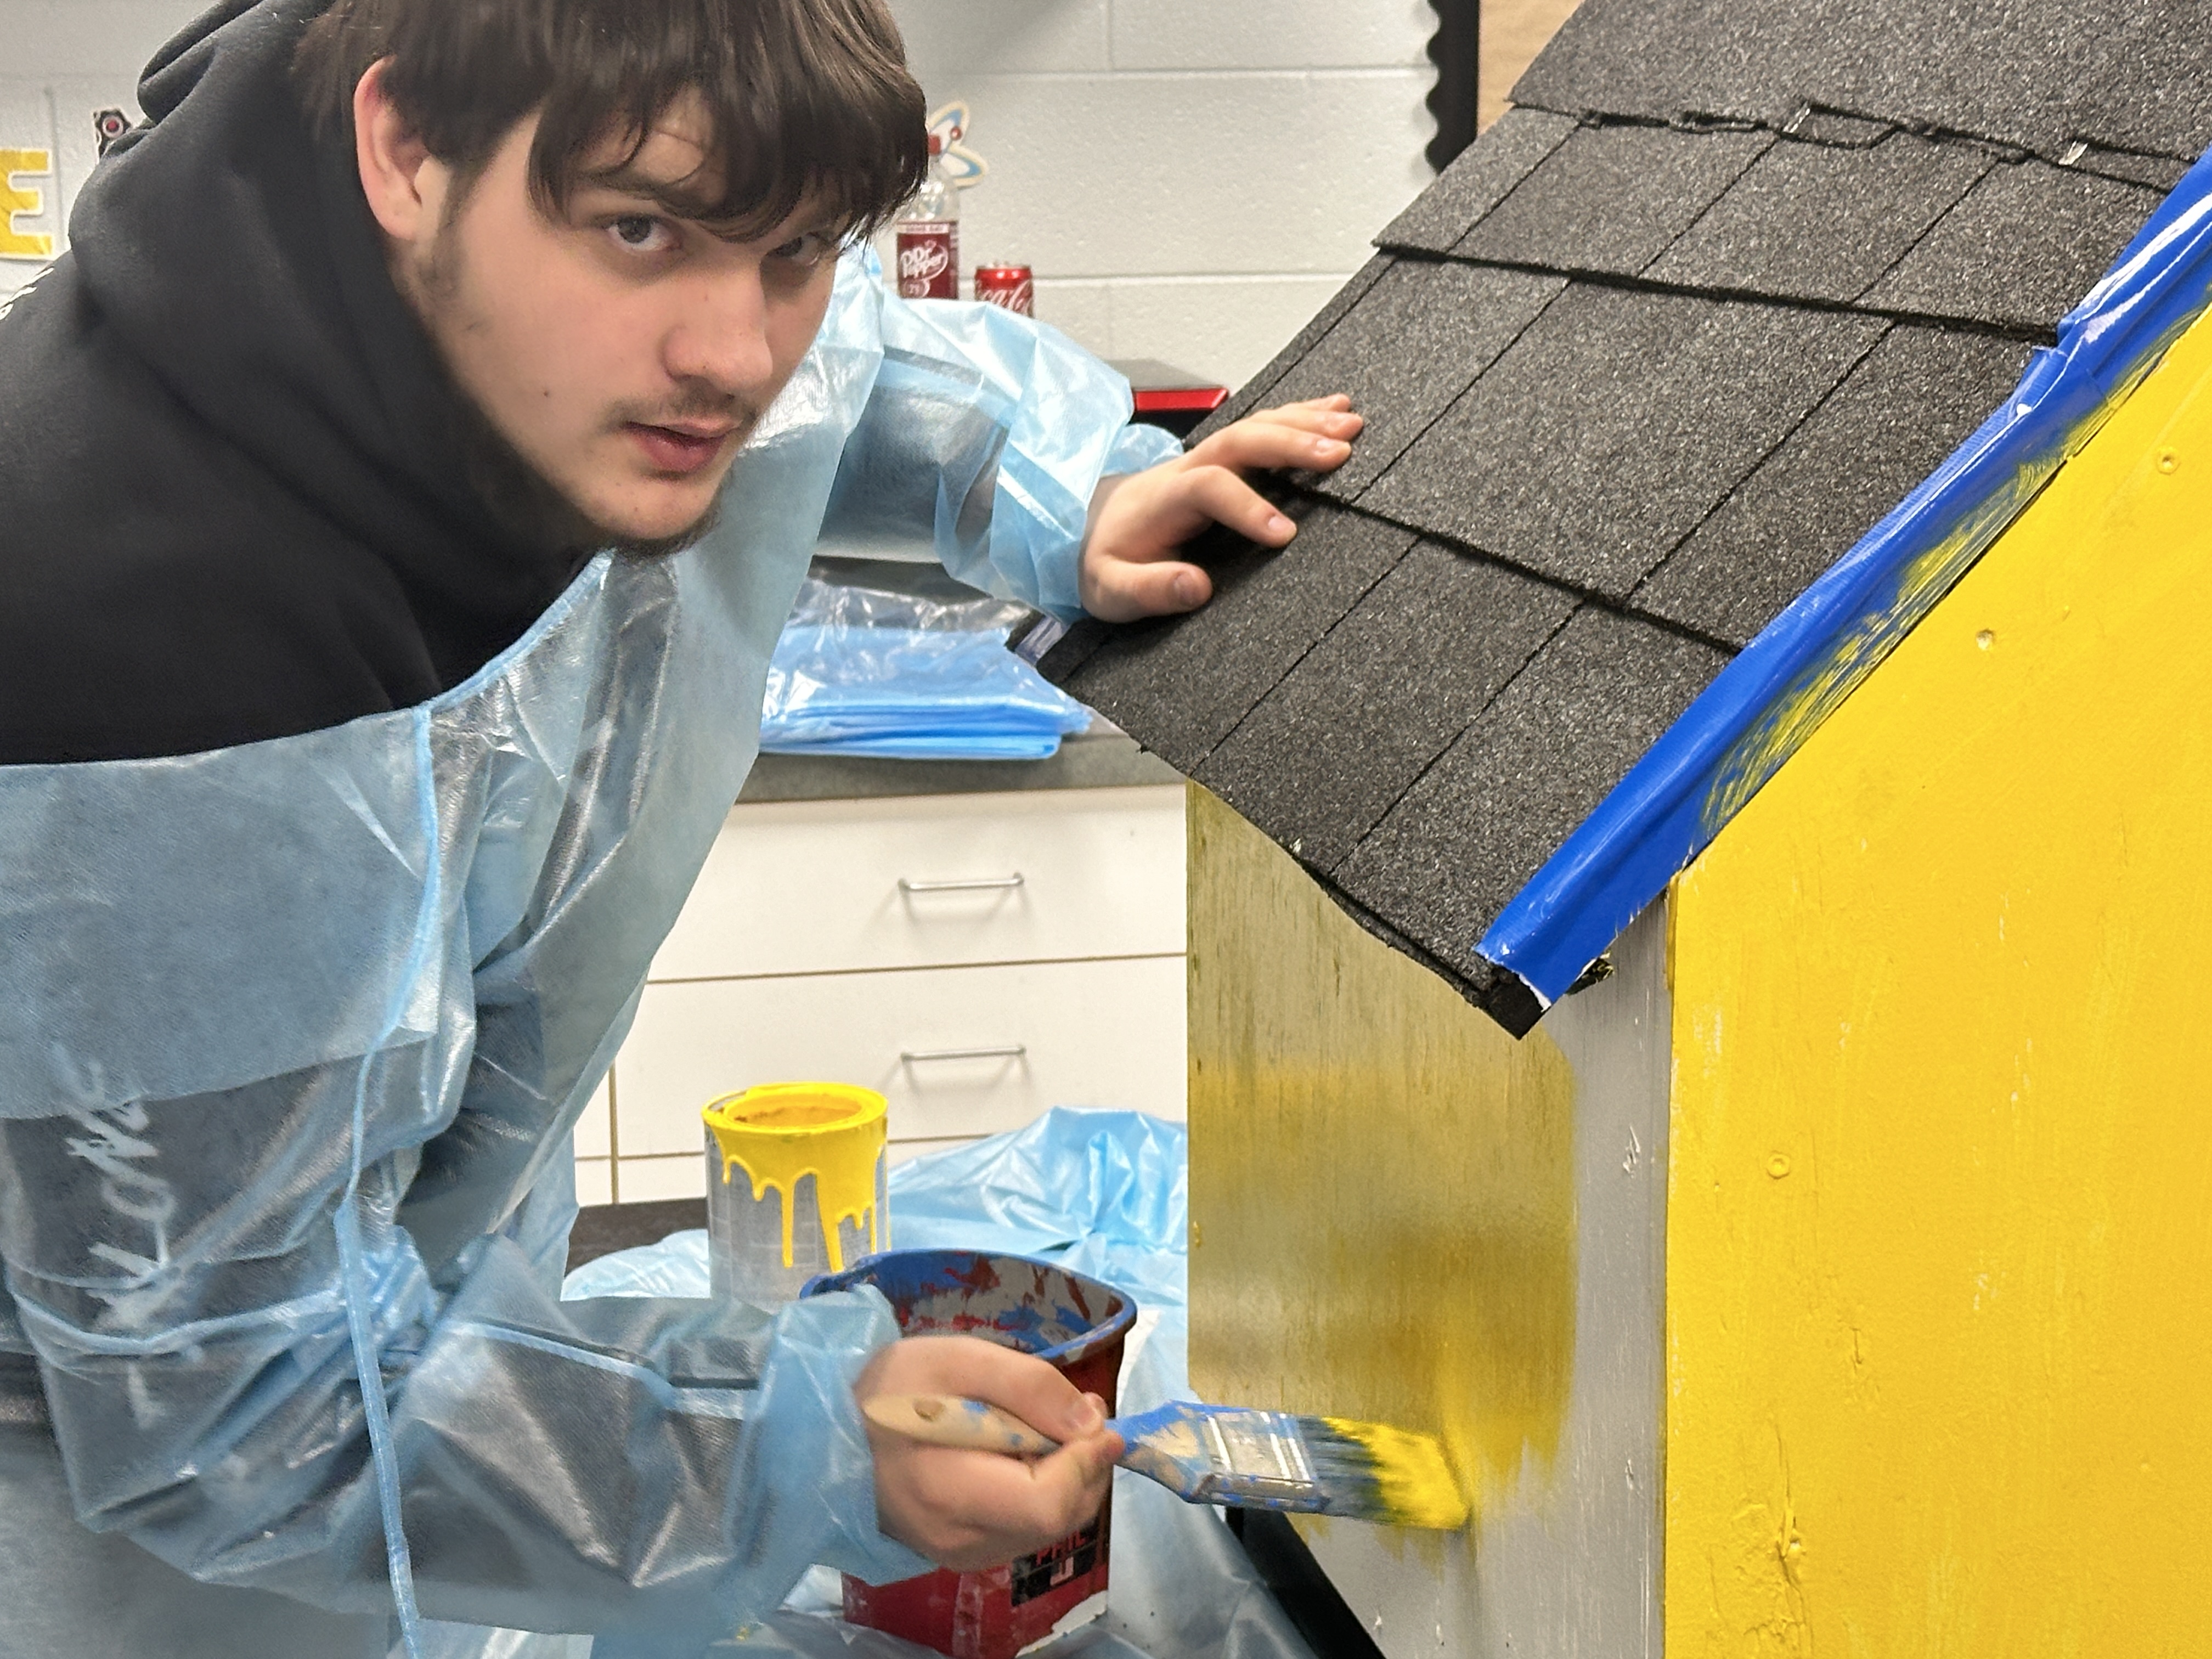 A teen looks at the camera while painting a dog house bright yellow